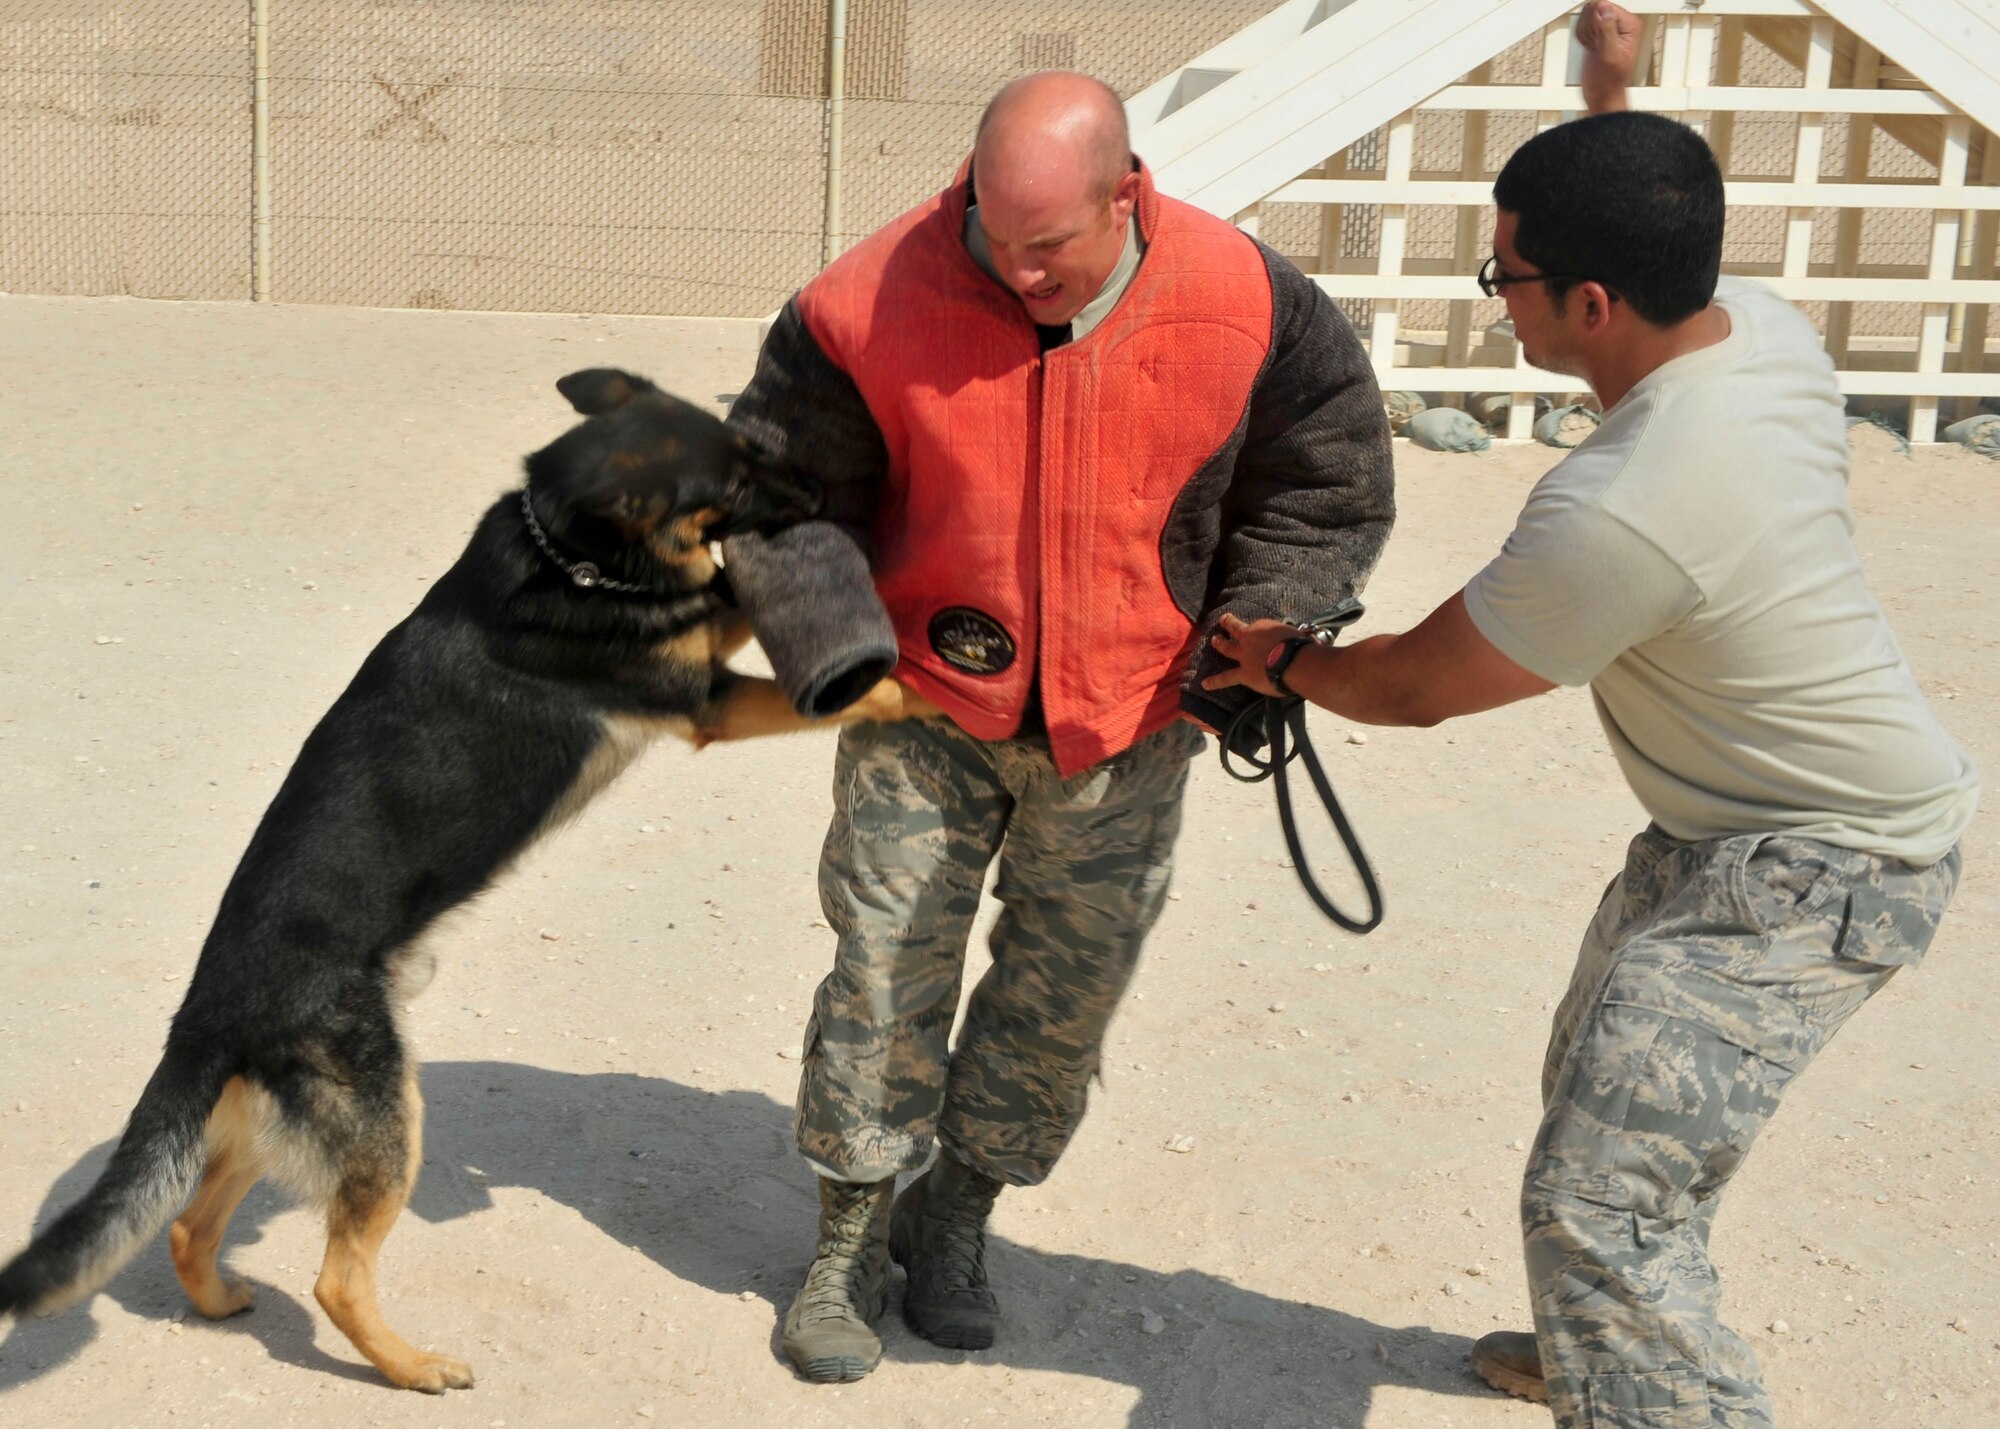 U.S. Air Force Staff Sgt. Miguel Marrero, 379th Security Forces Squadron K-9 handler, instructs Military Working Dog Renato during training exercises at Al Udeid Air Base, Qatar, Sept. 24, 2014. K-9 handlers and military working dogs are trained for situations both in and out of combat. (U.S. Air Force photo by Senior Airman Colin Cates)